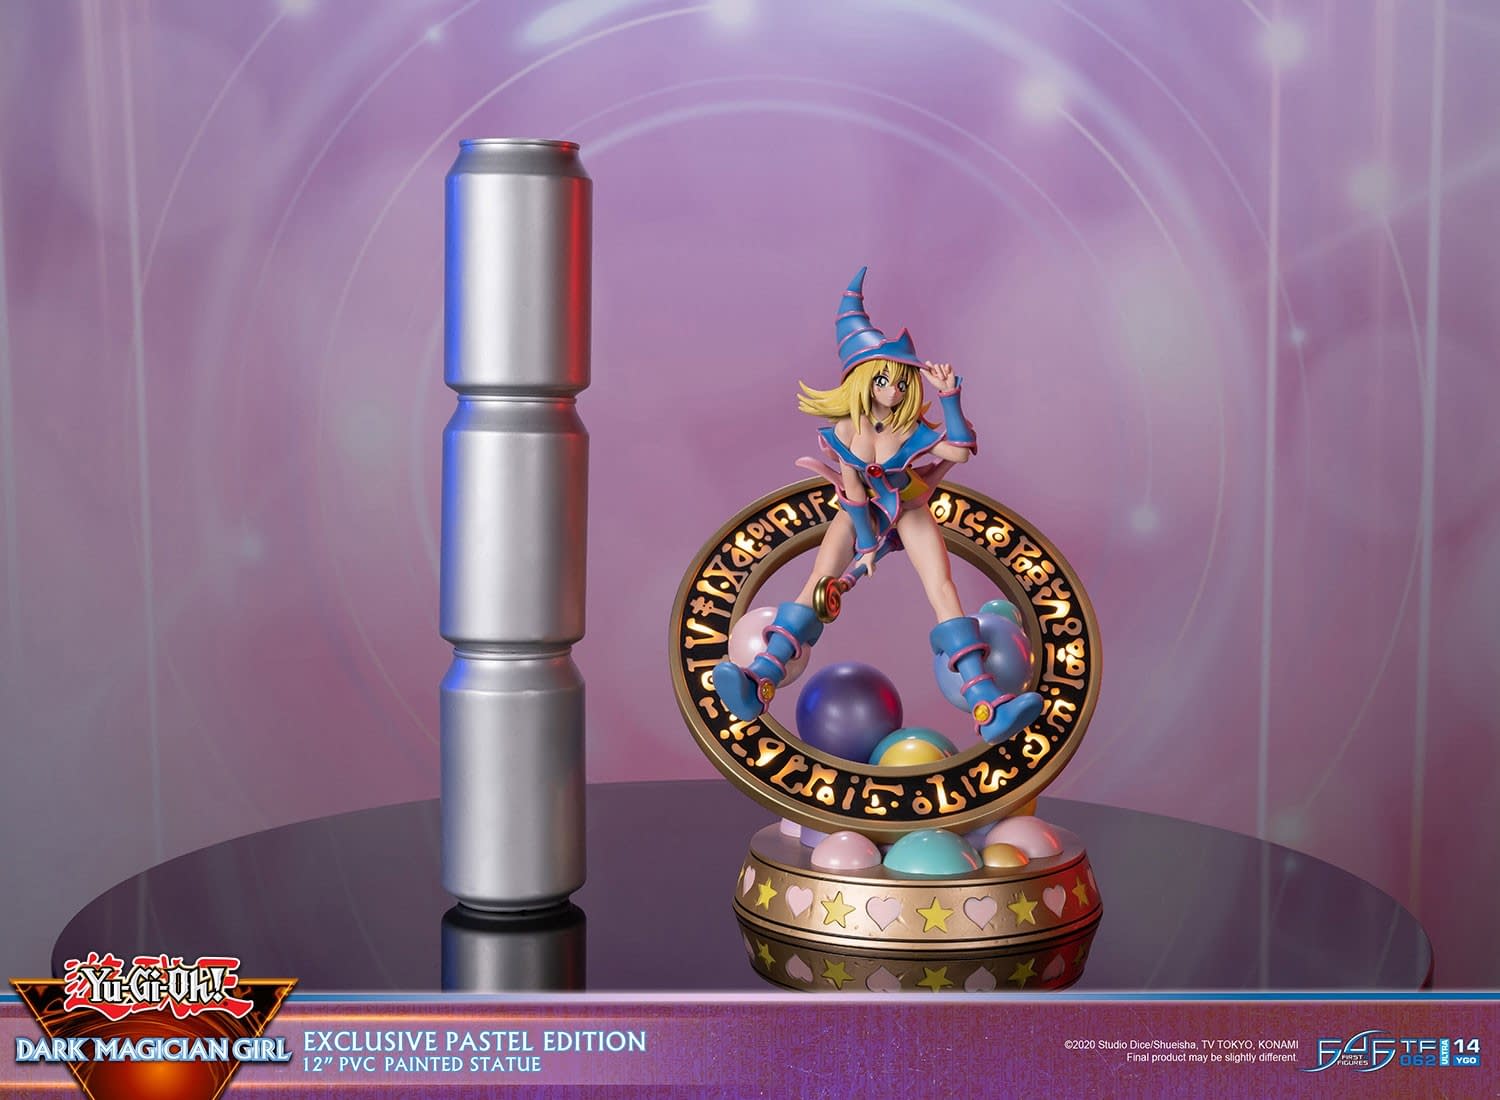 First 4 Figures Summons Dark Magician Girl with New Yu-Gi-Oh Statue